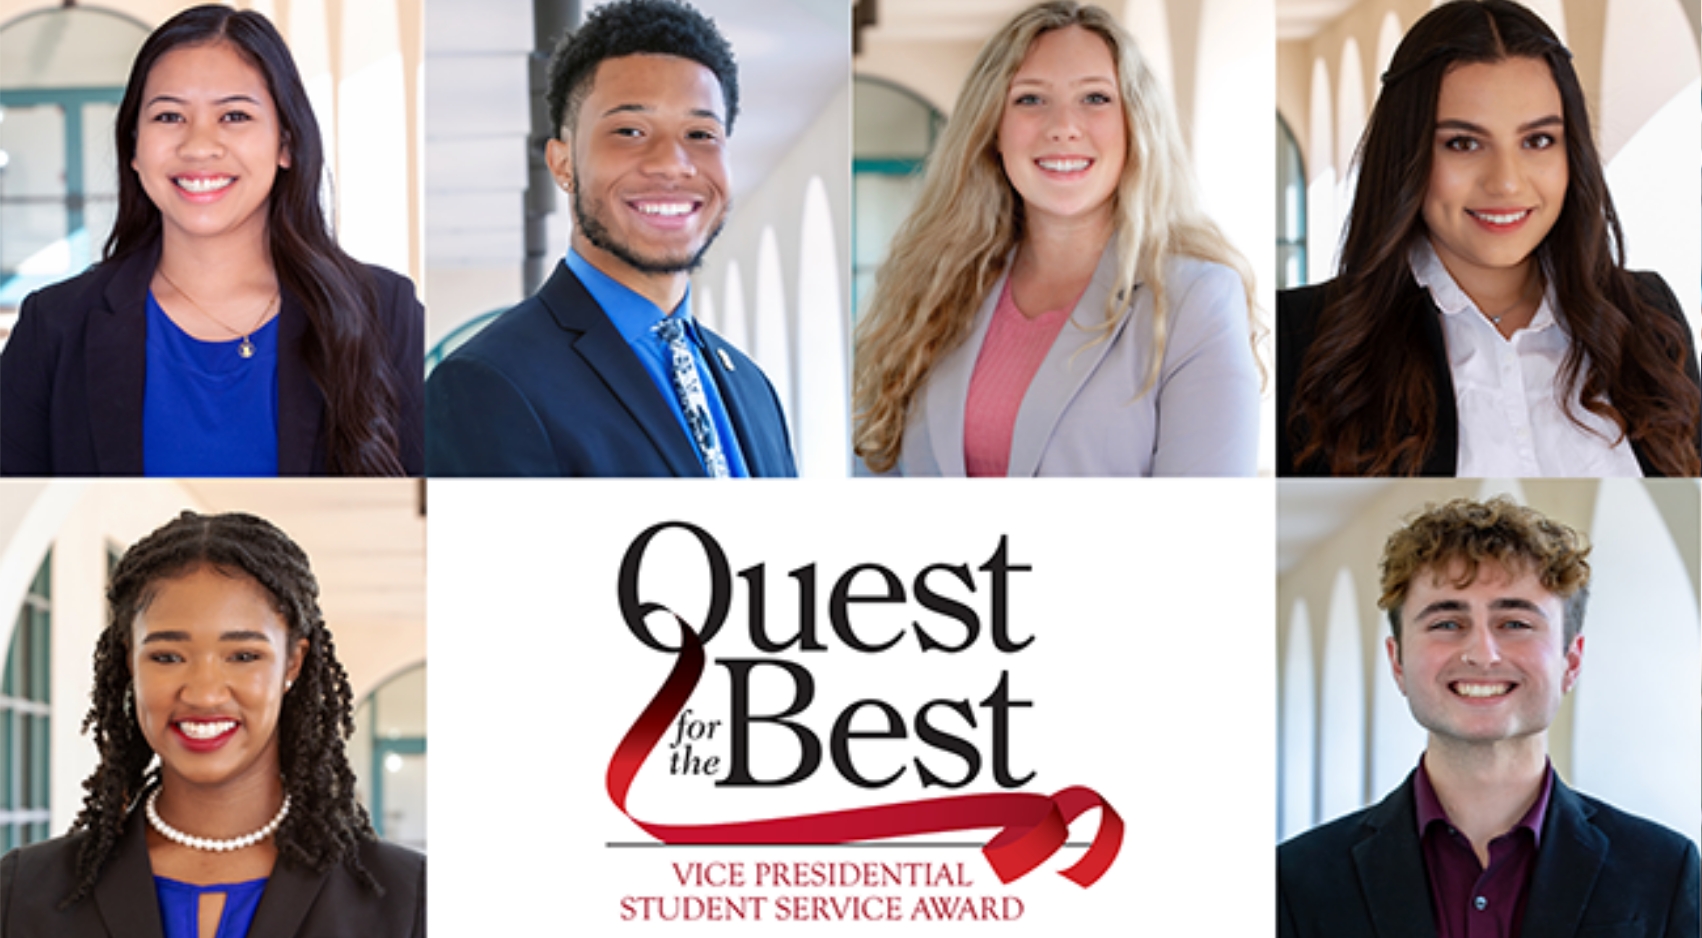 The 2023 Quest for the Best awards will recognize 10 outstanding student leaders at SDSU.